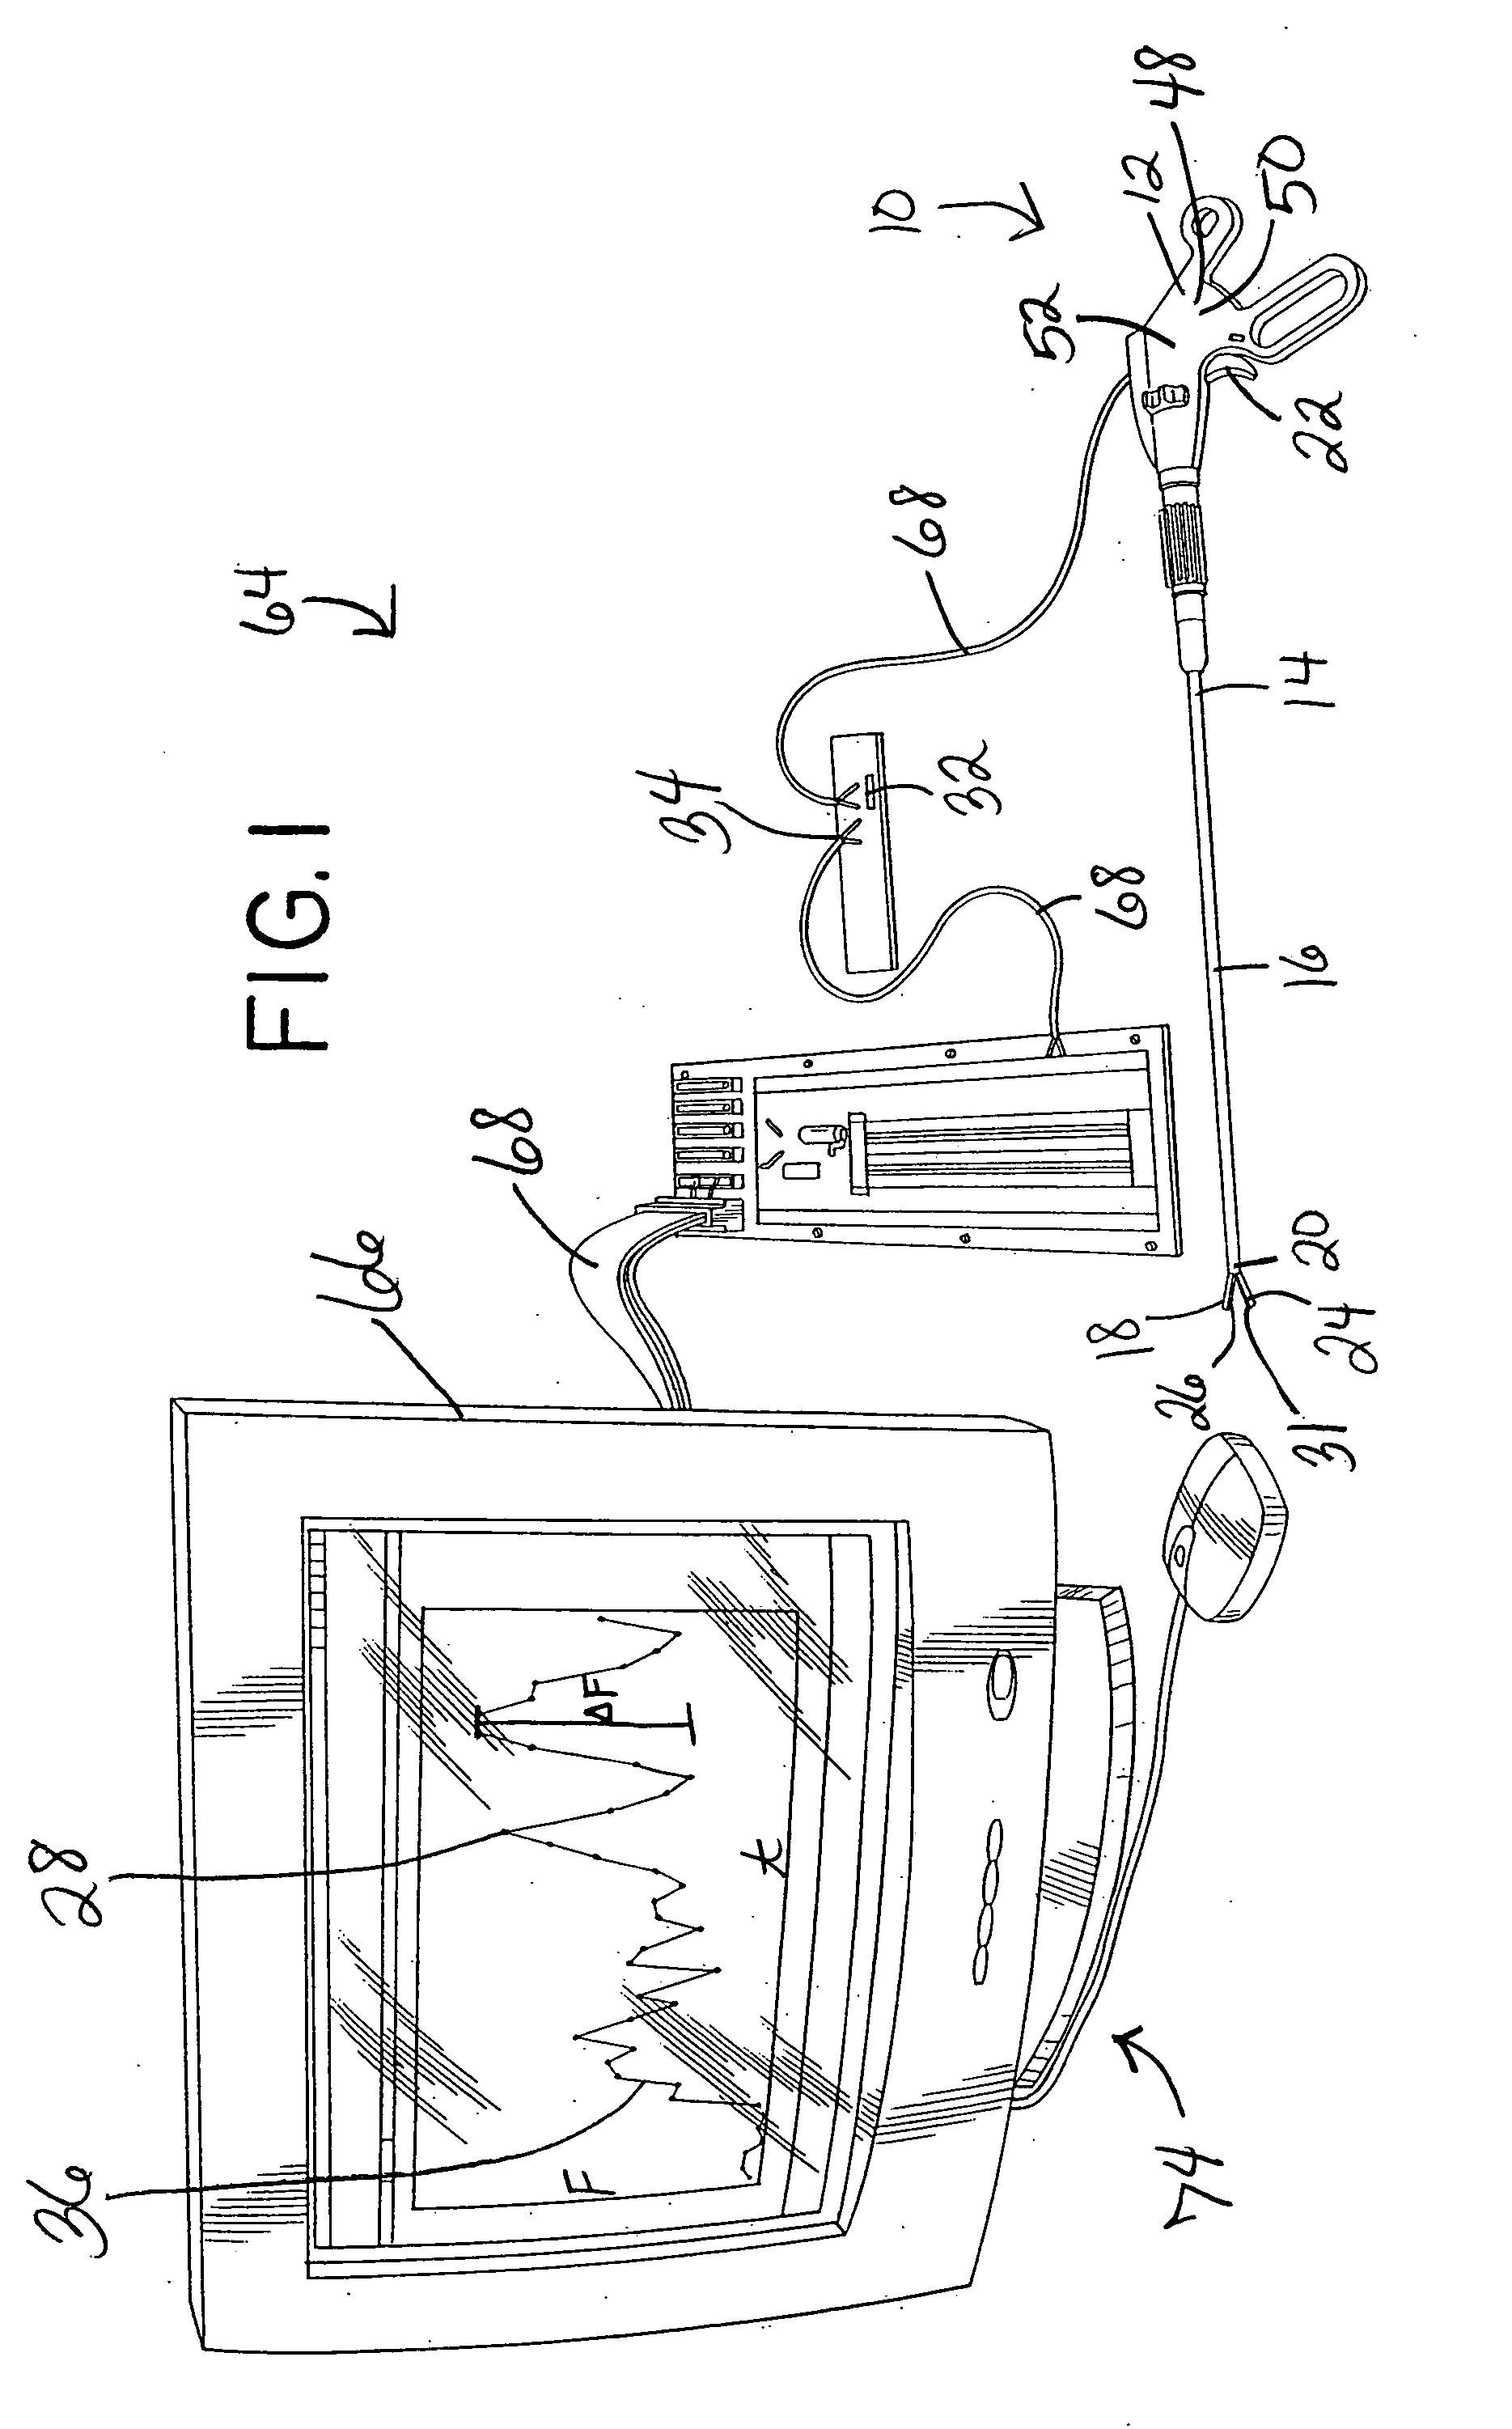 Gentle touch surgical instrument and method of using same